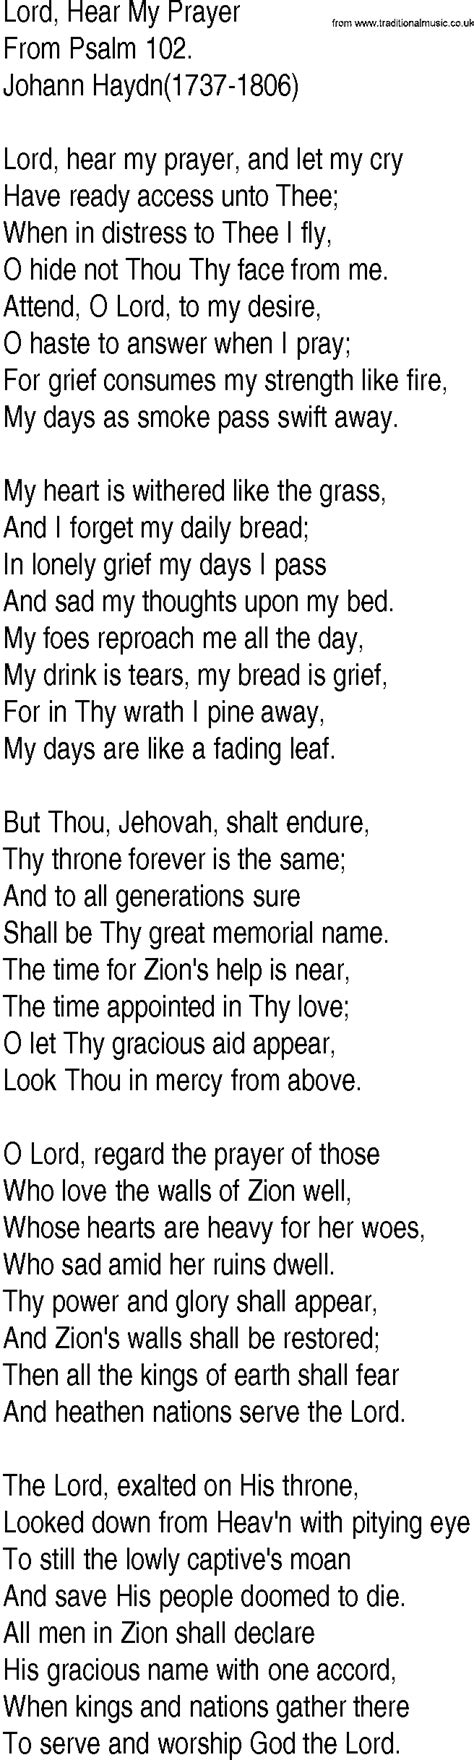 Hymn And Gospel Song Lyrics For Lord Hear My Prayer By From Psalm